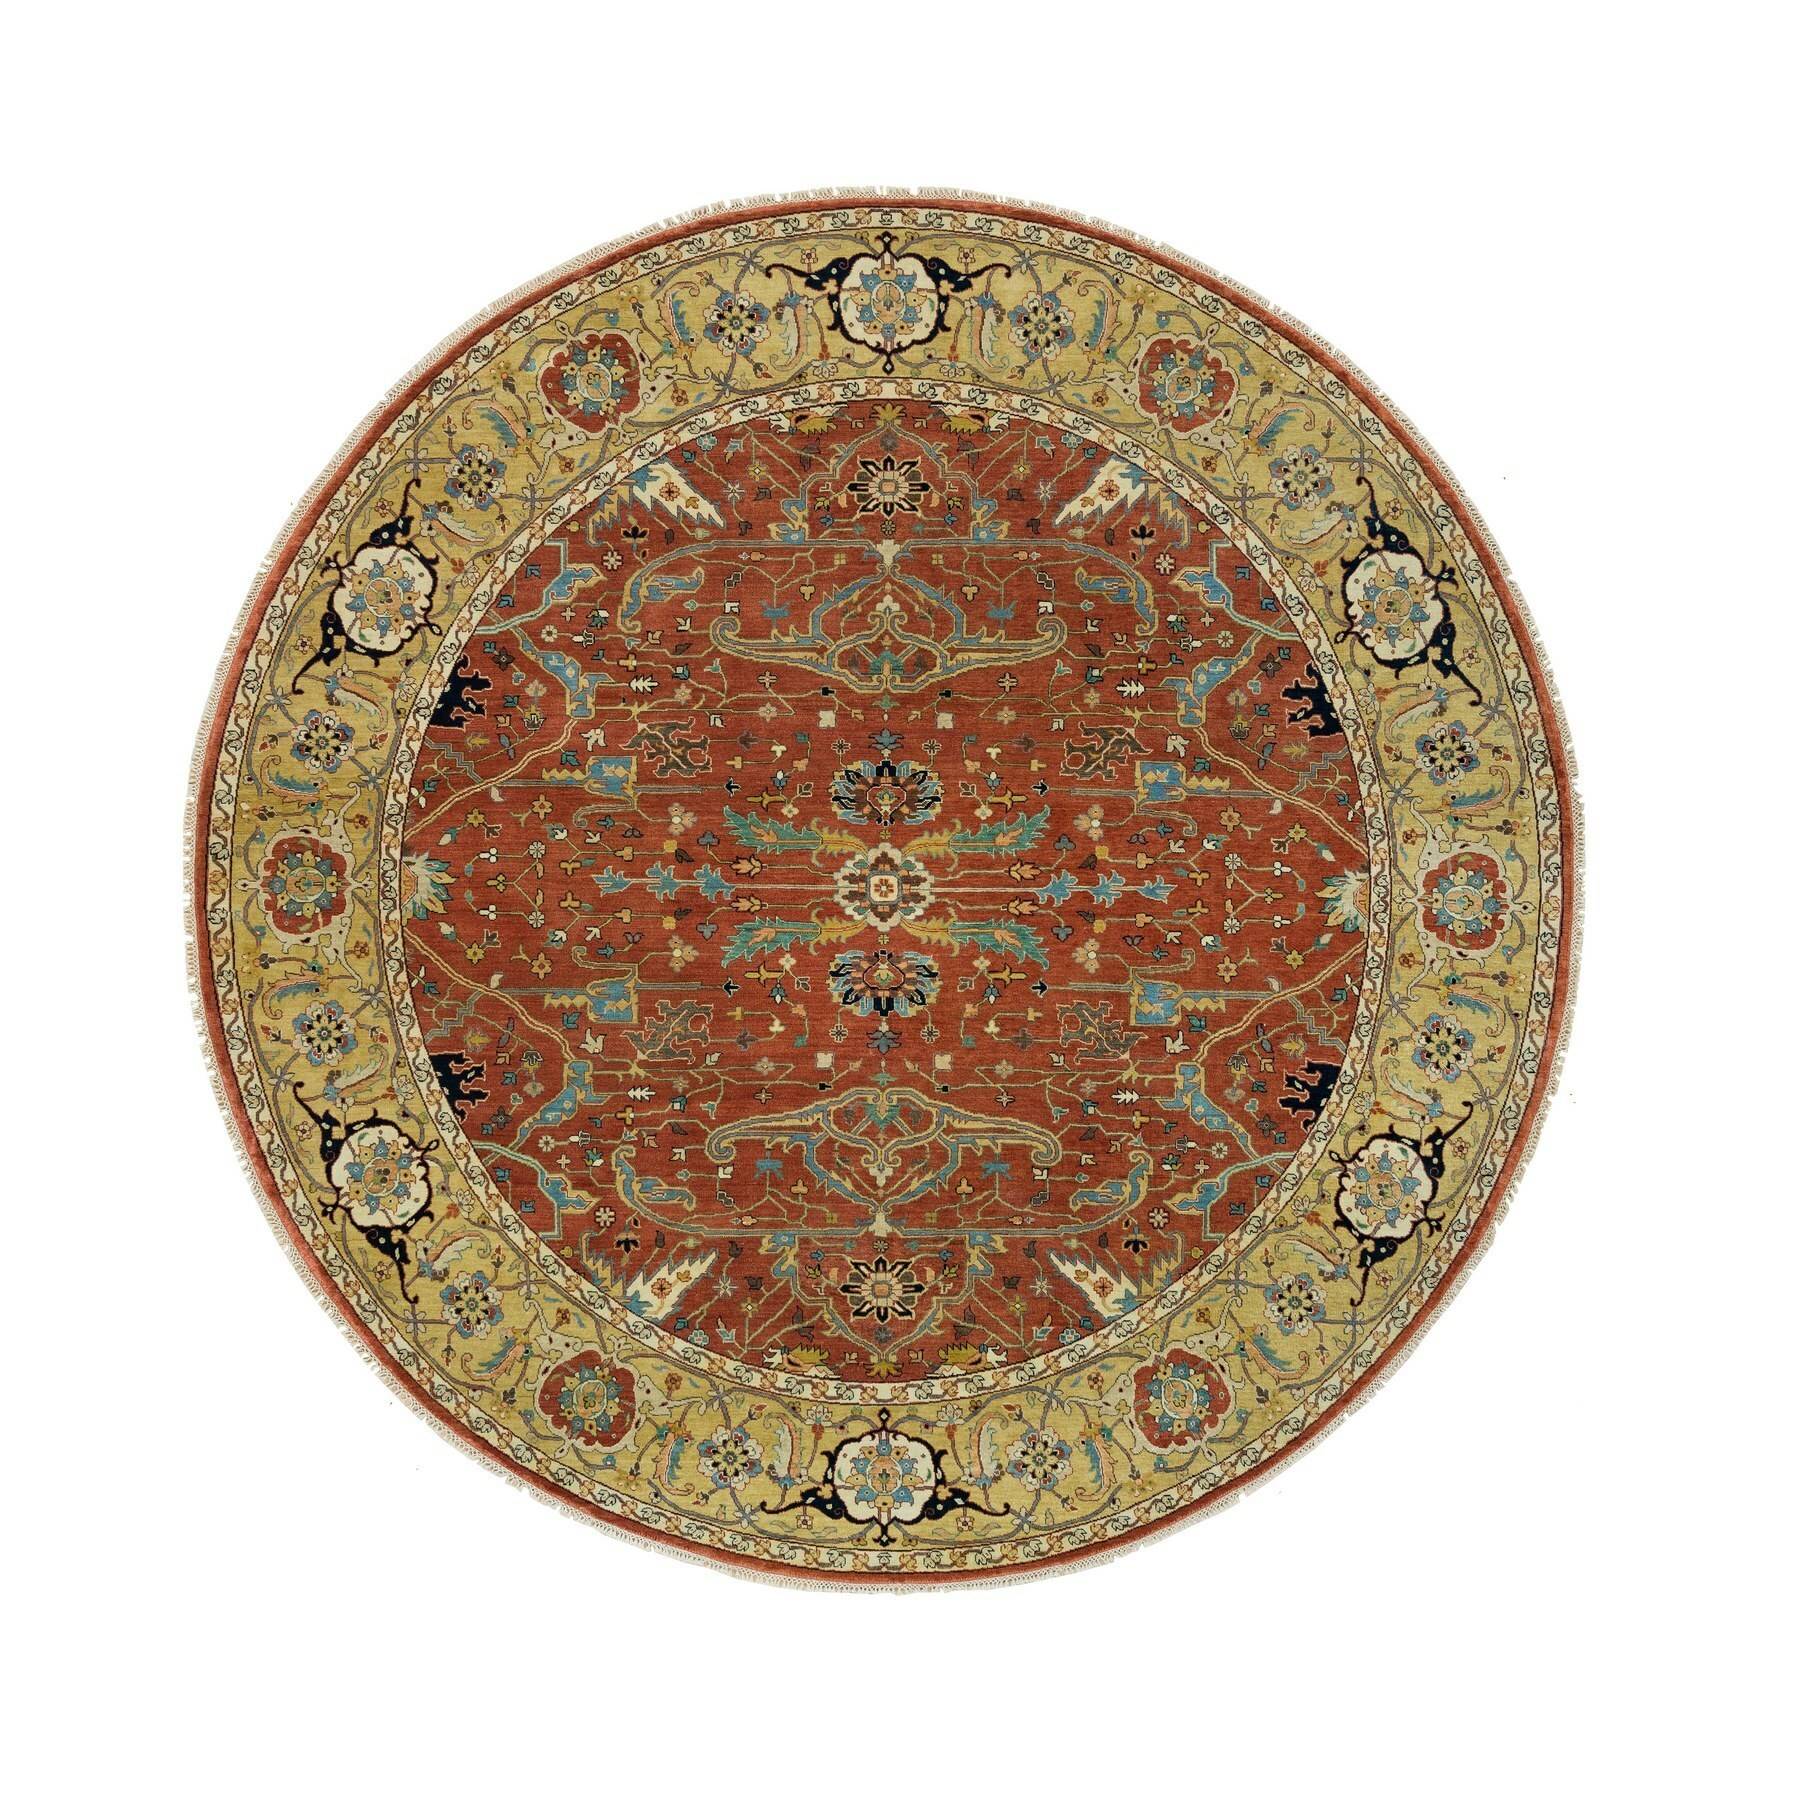 10'x10' Rust Red, Antiqued Fine Heriz Re-Creation, Natural Dyes Dense Weave, Soft Wool Hand Woven, Round Oriental Rug 